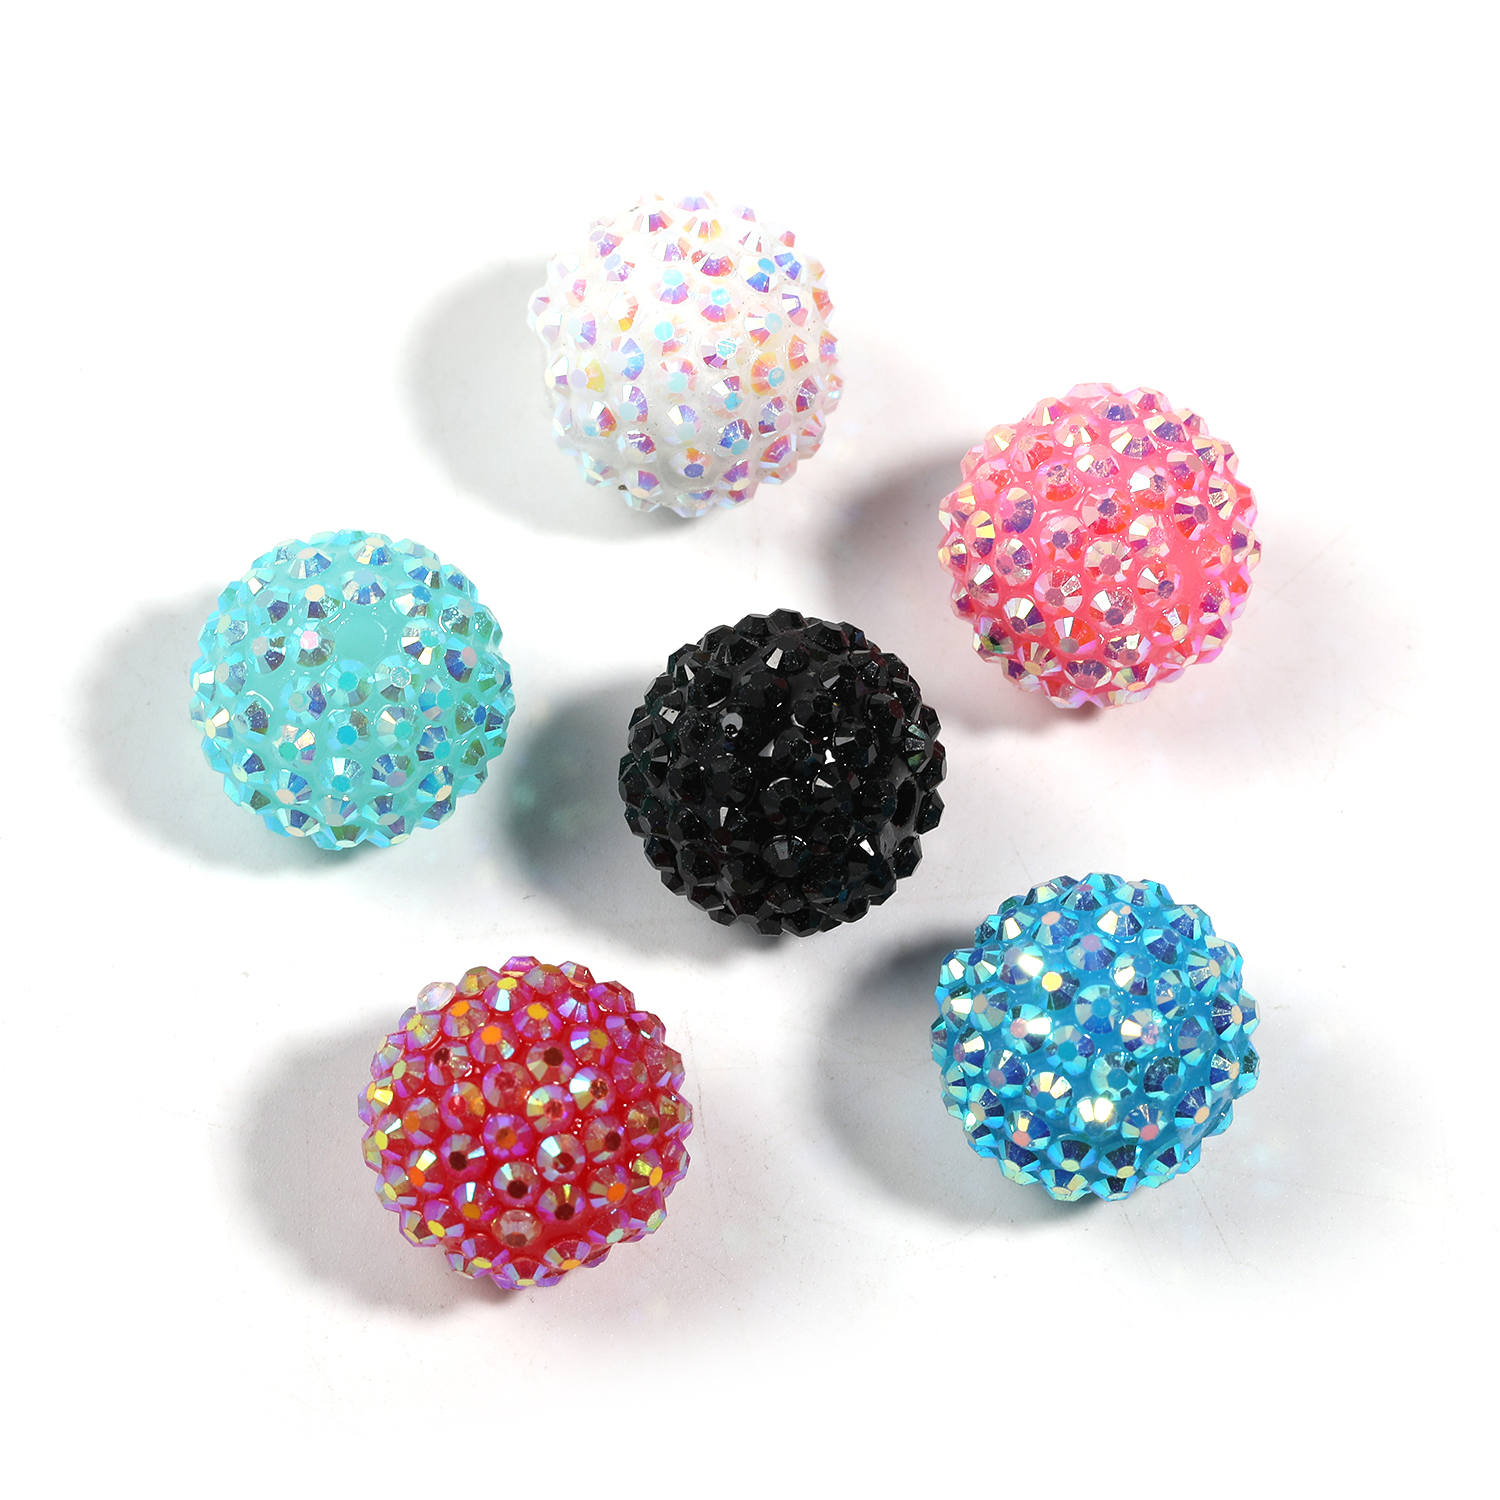 【B129】50pcs Colorful Rhinestone Beads Round Spacer Beads for Jewelry Bracelet Necklace Pen Bag -JPM